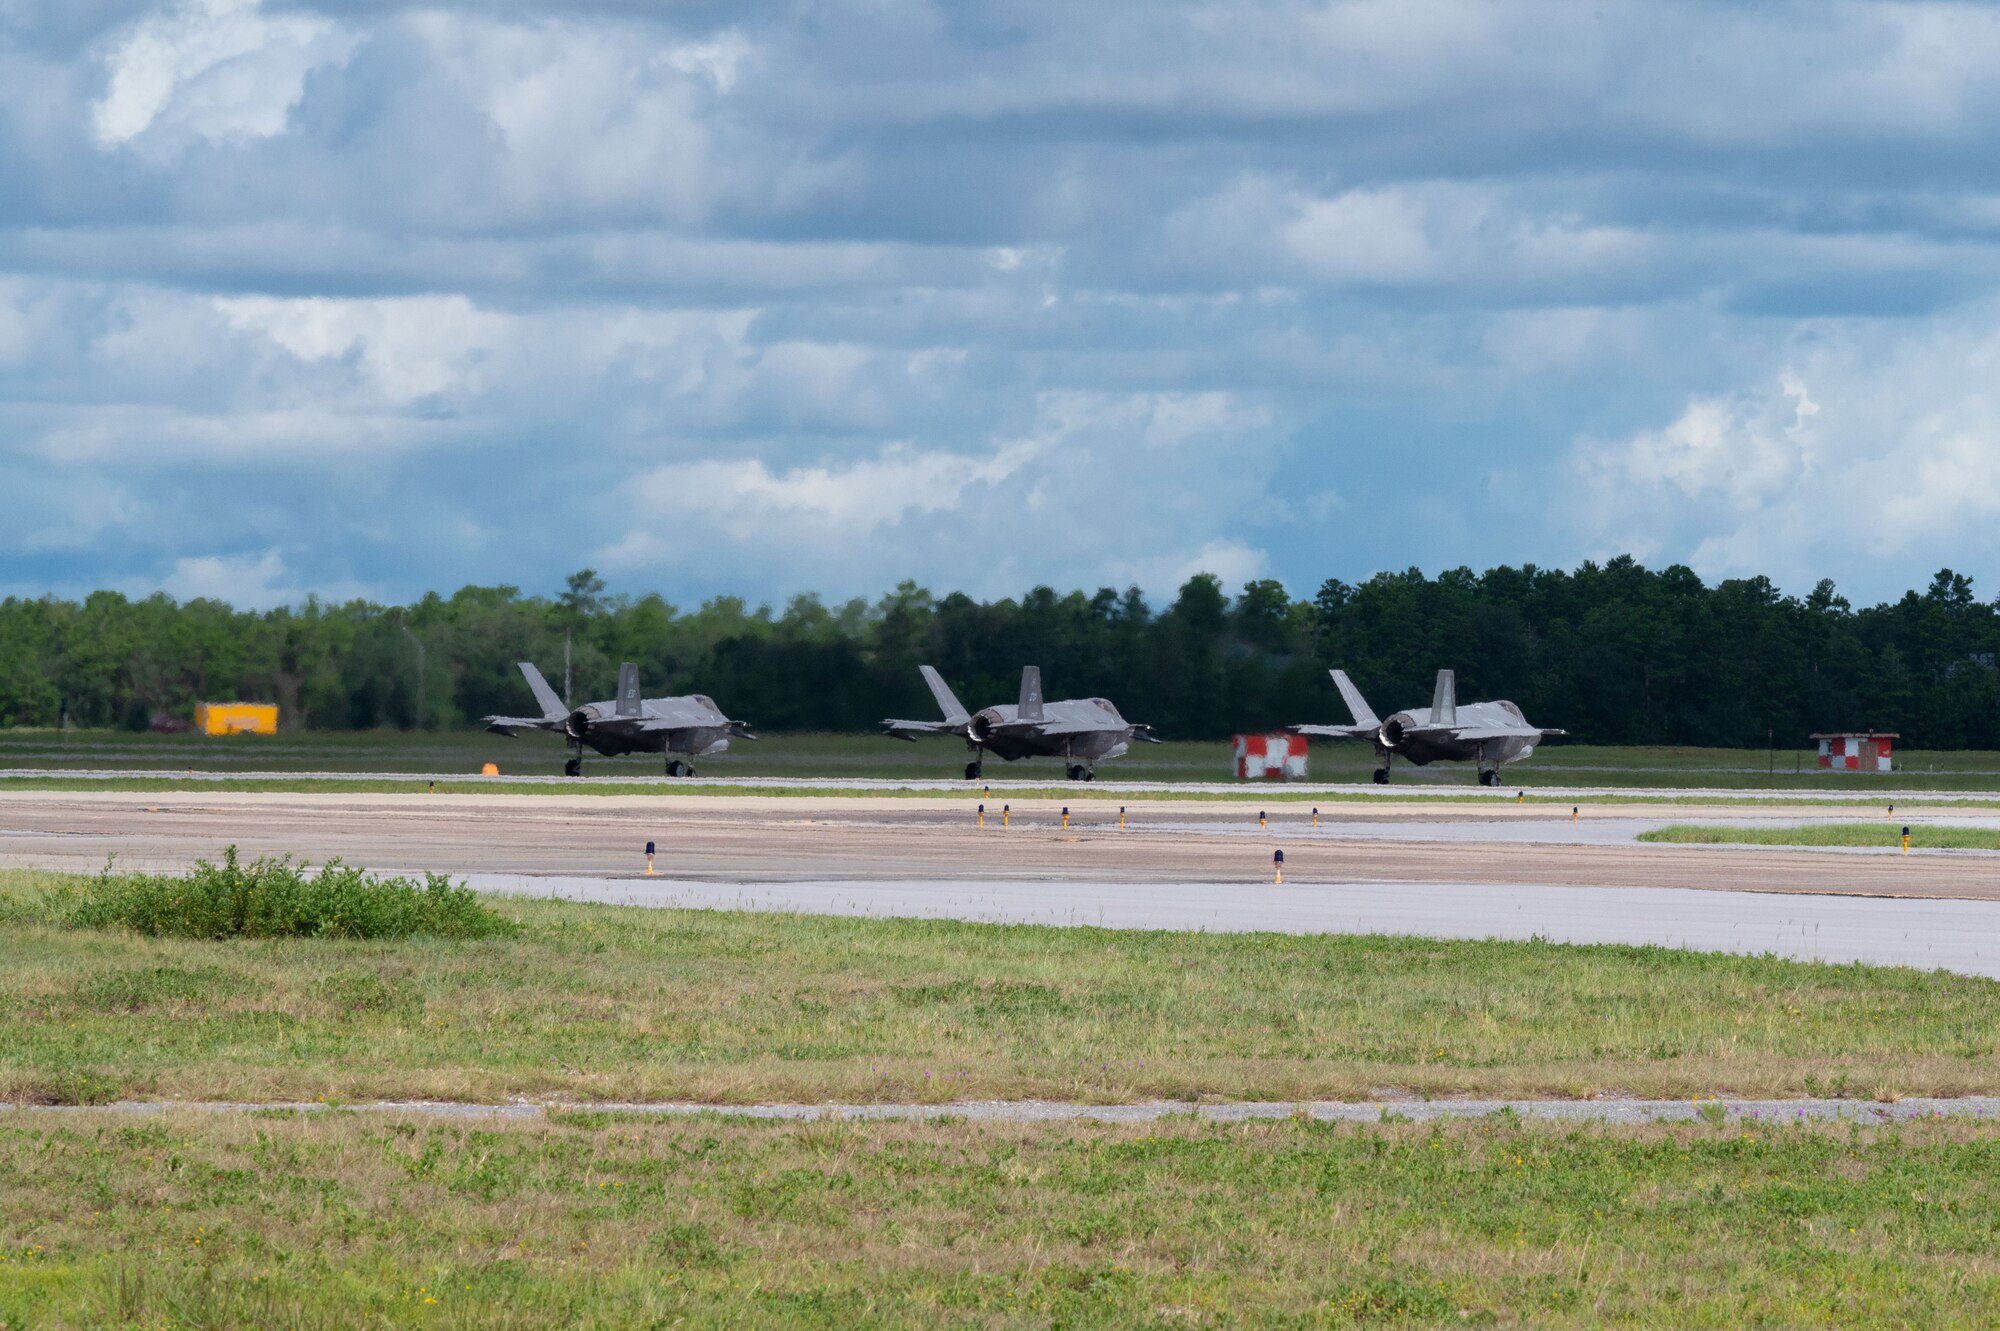 Airmen with the 33rd FW left for Volk Field Air National Guard Base, Wisconsin, to participate in exercise Northern Lightning, a joint training exercise emphasizing user-defined objectives resulting in tailored, scenario-based, full-spectrum, high-end training.